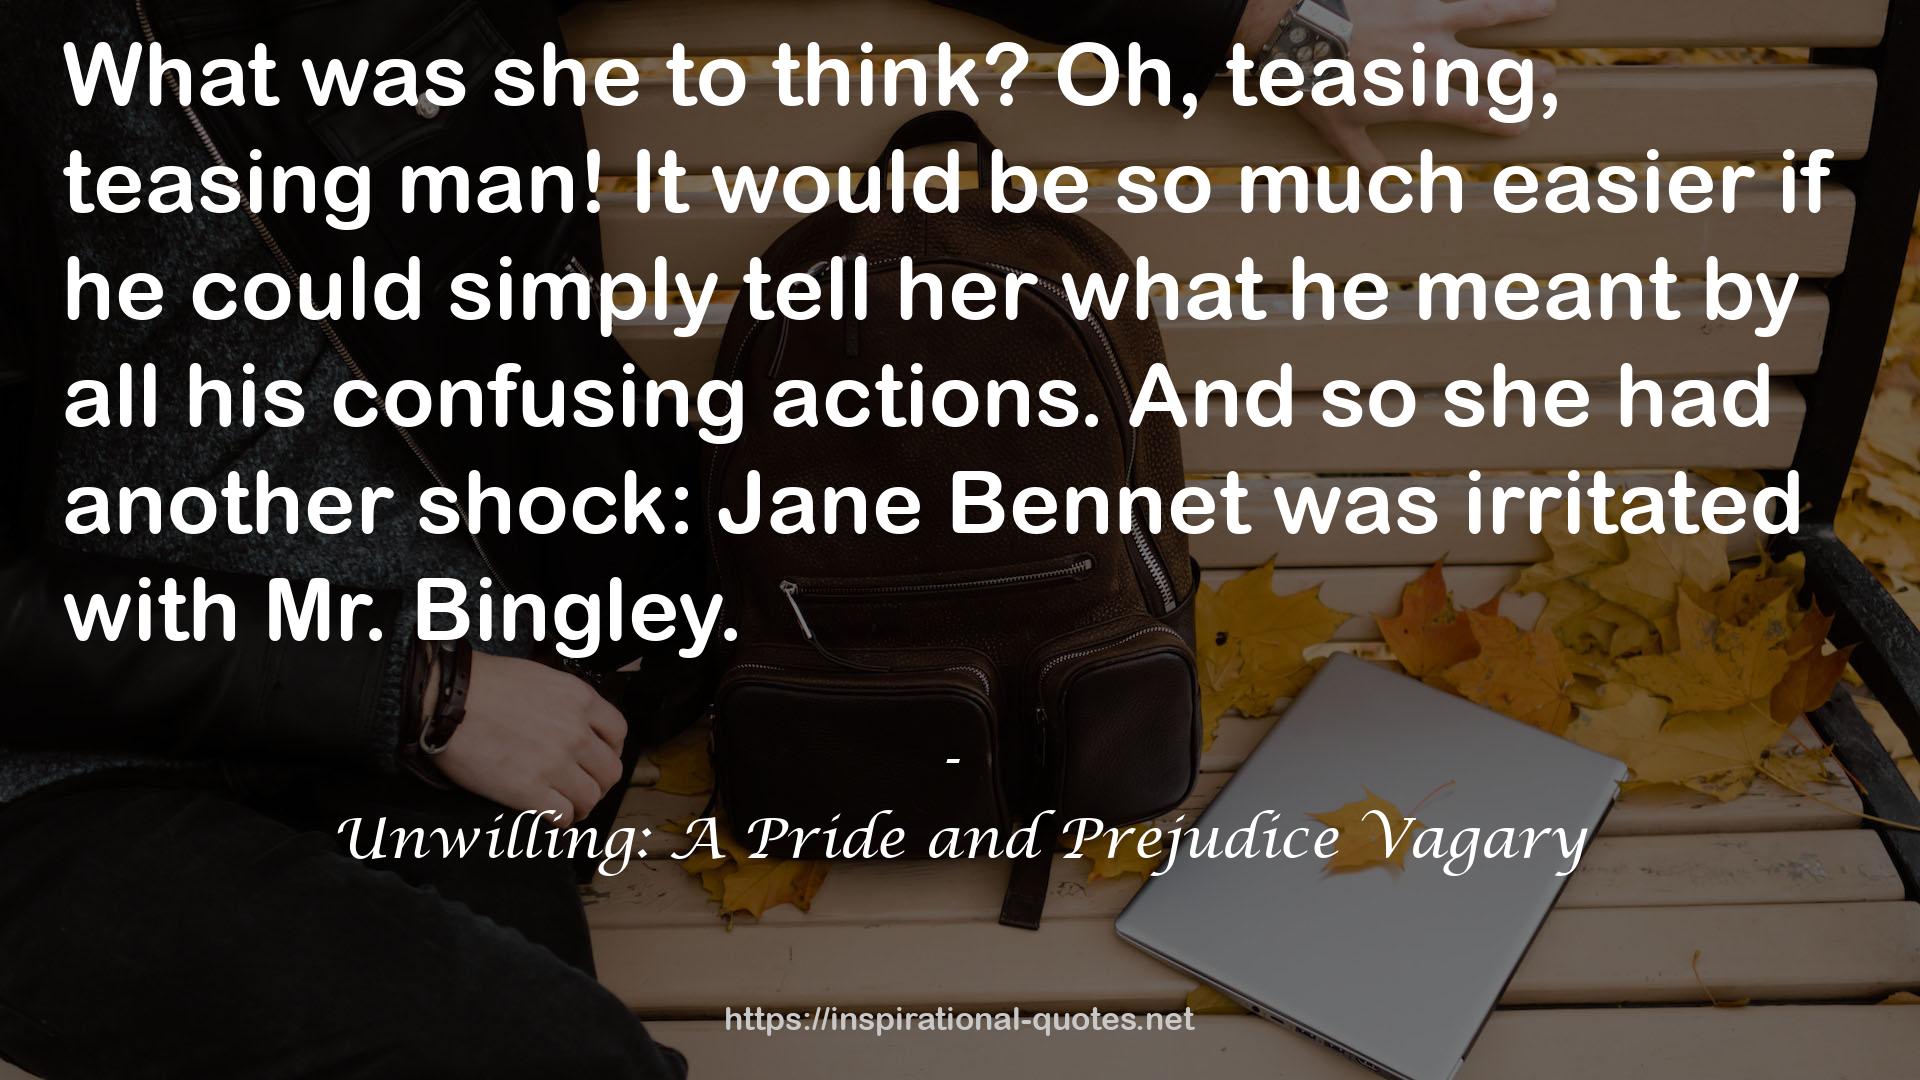 Unwilling: A Pride and Prejudice Vagary QUOTES